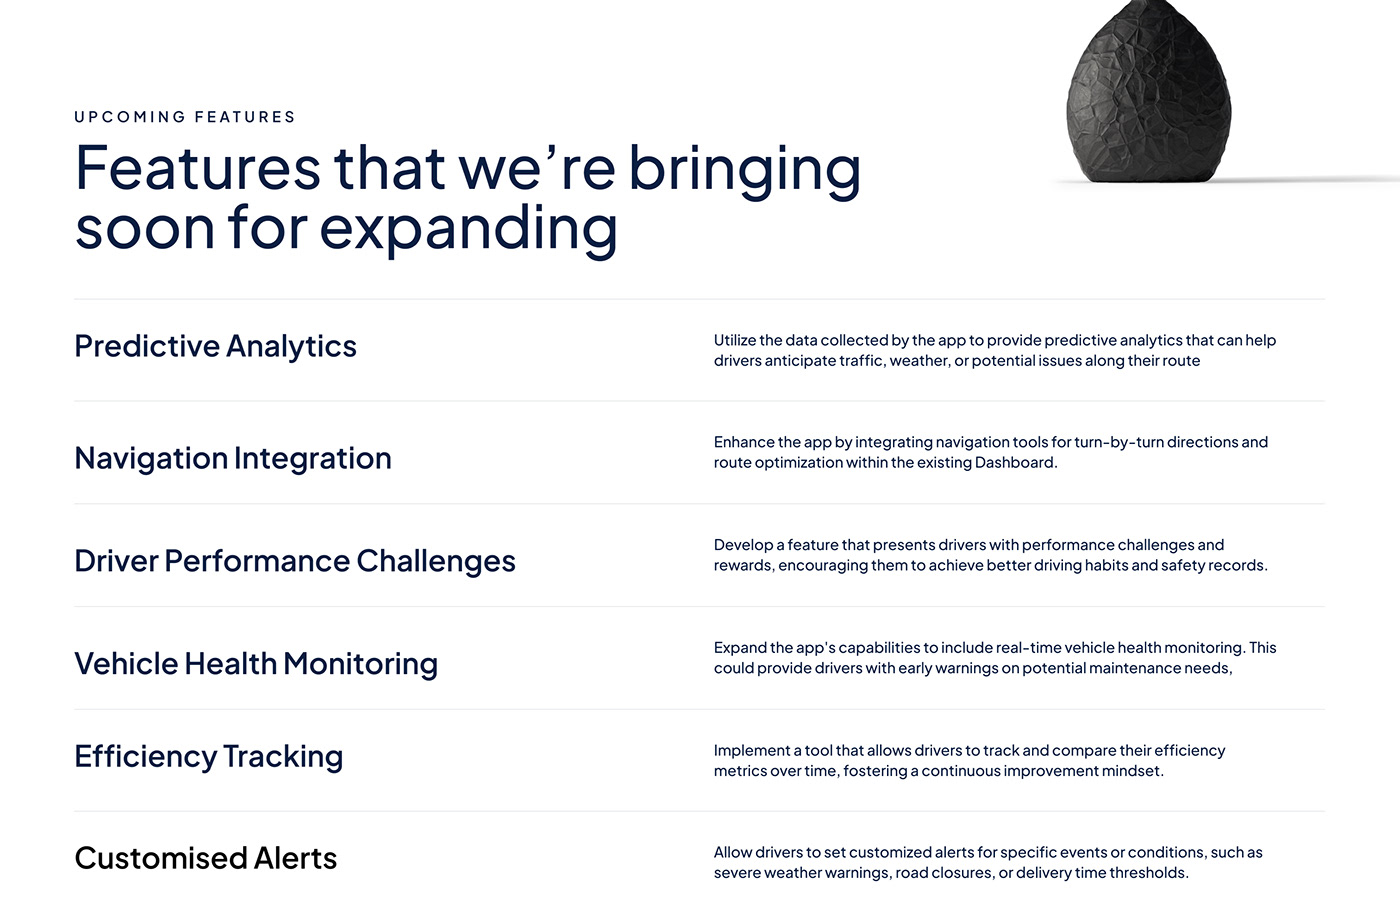 Upcoming features: predictive analysis, navigation, vehicle health, efficiency tracking & alerts